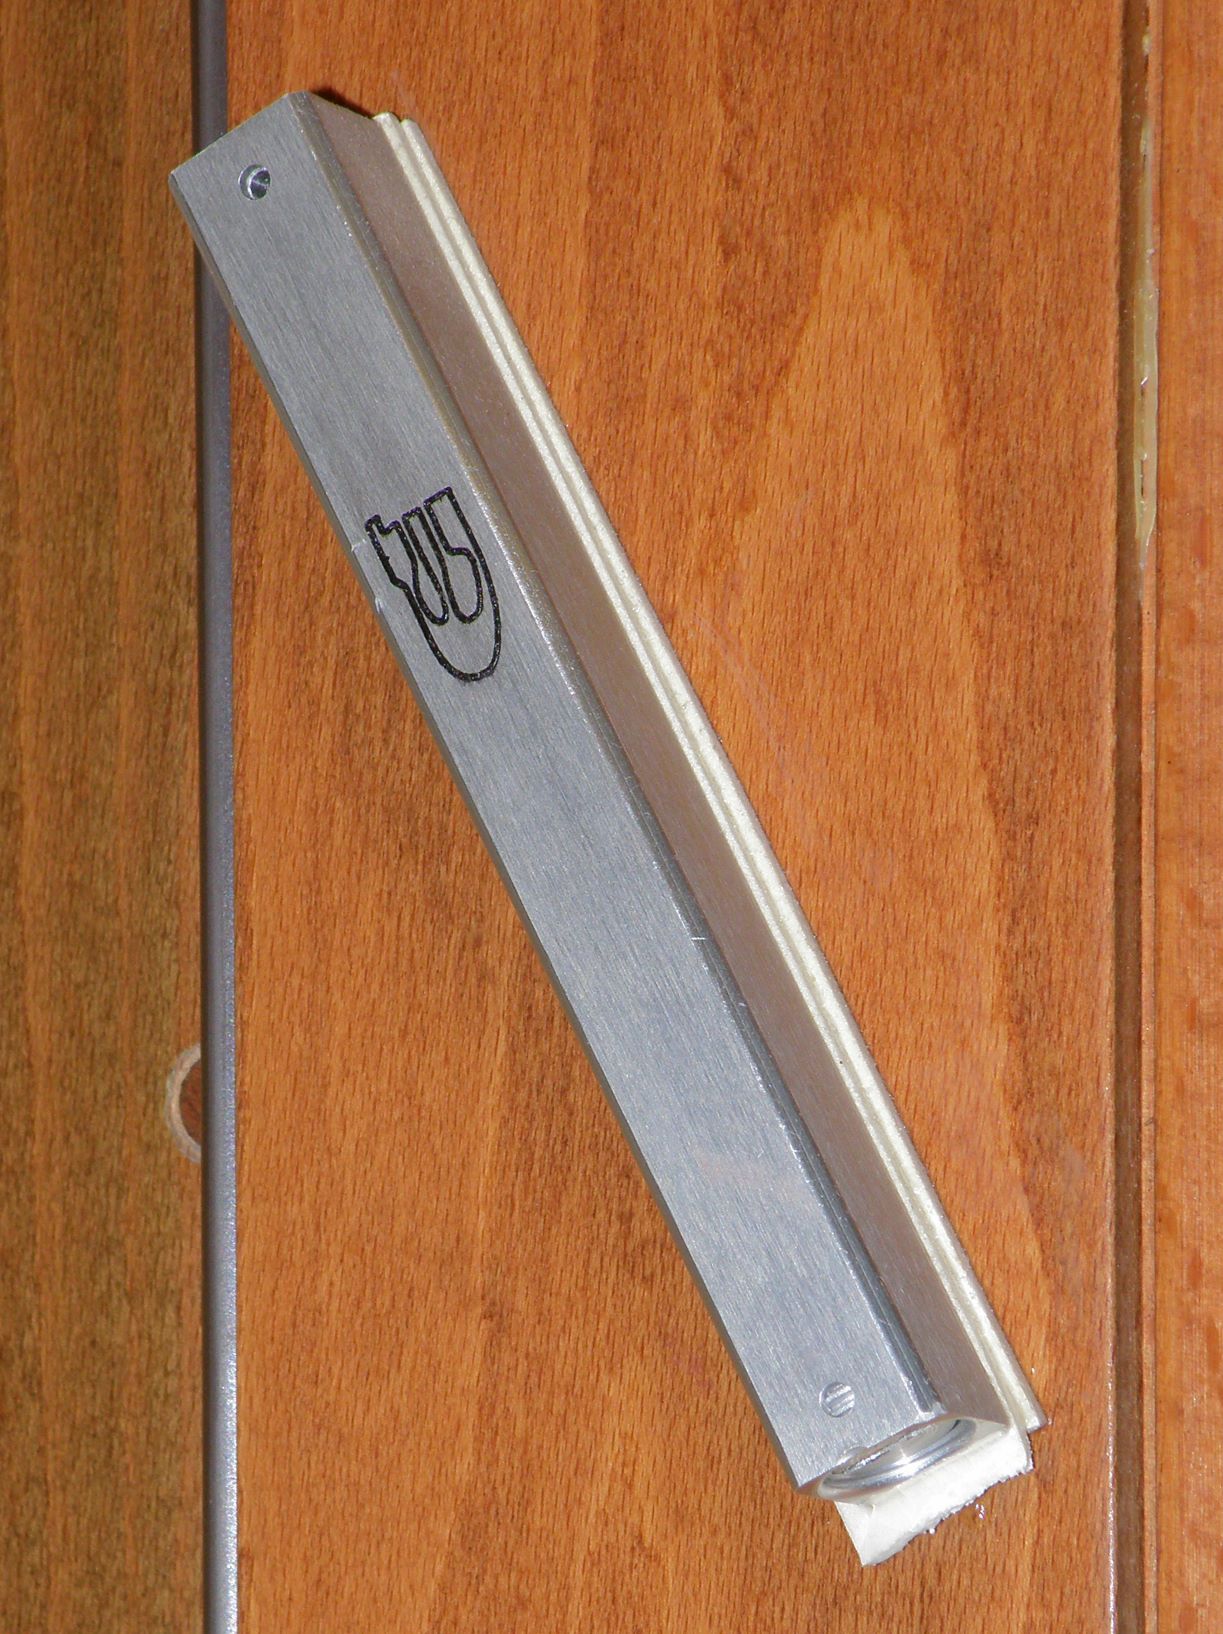 Why We Do Not Use the Mezuzah